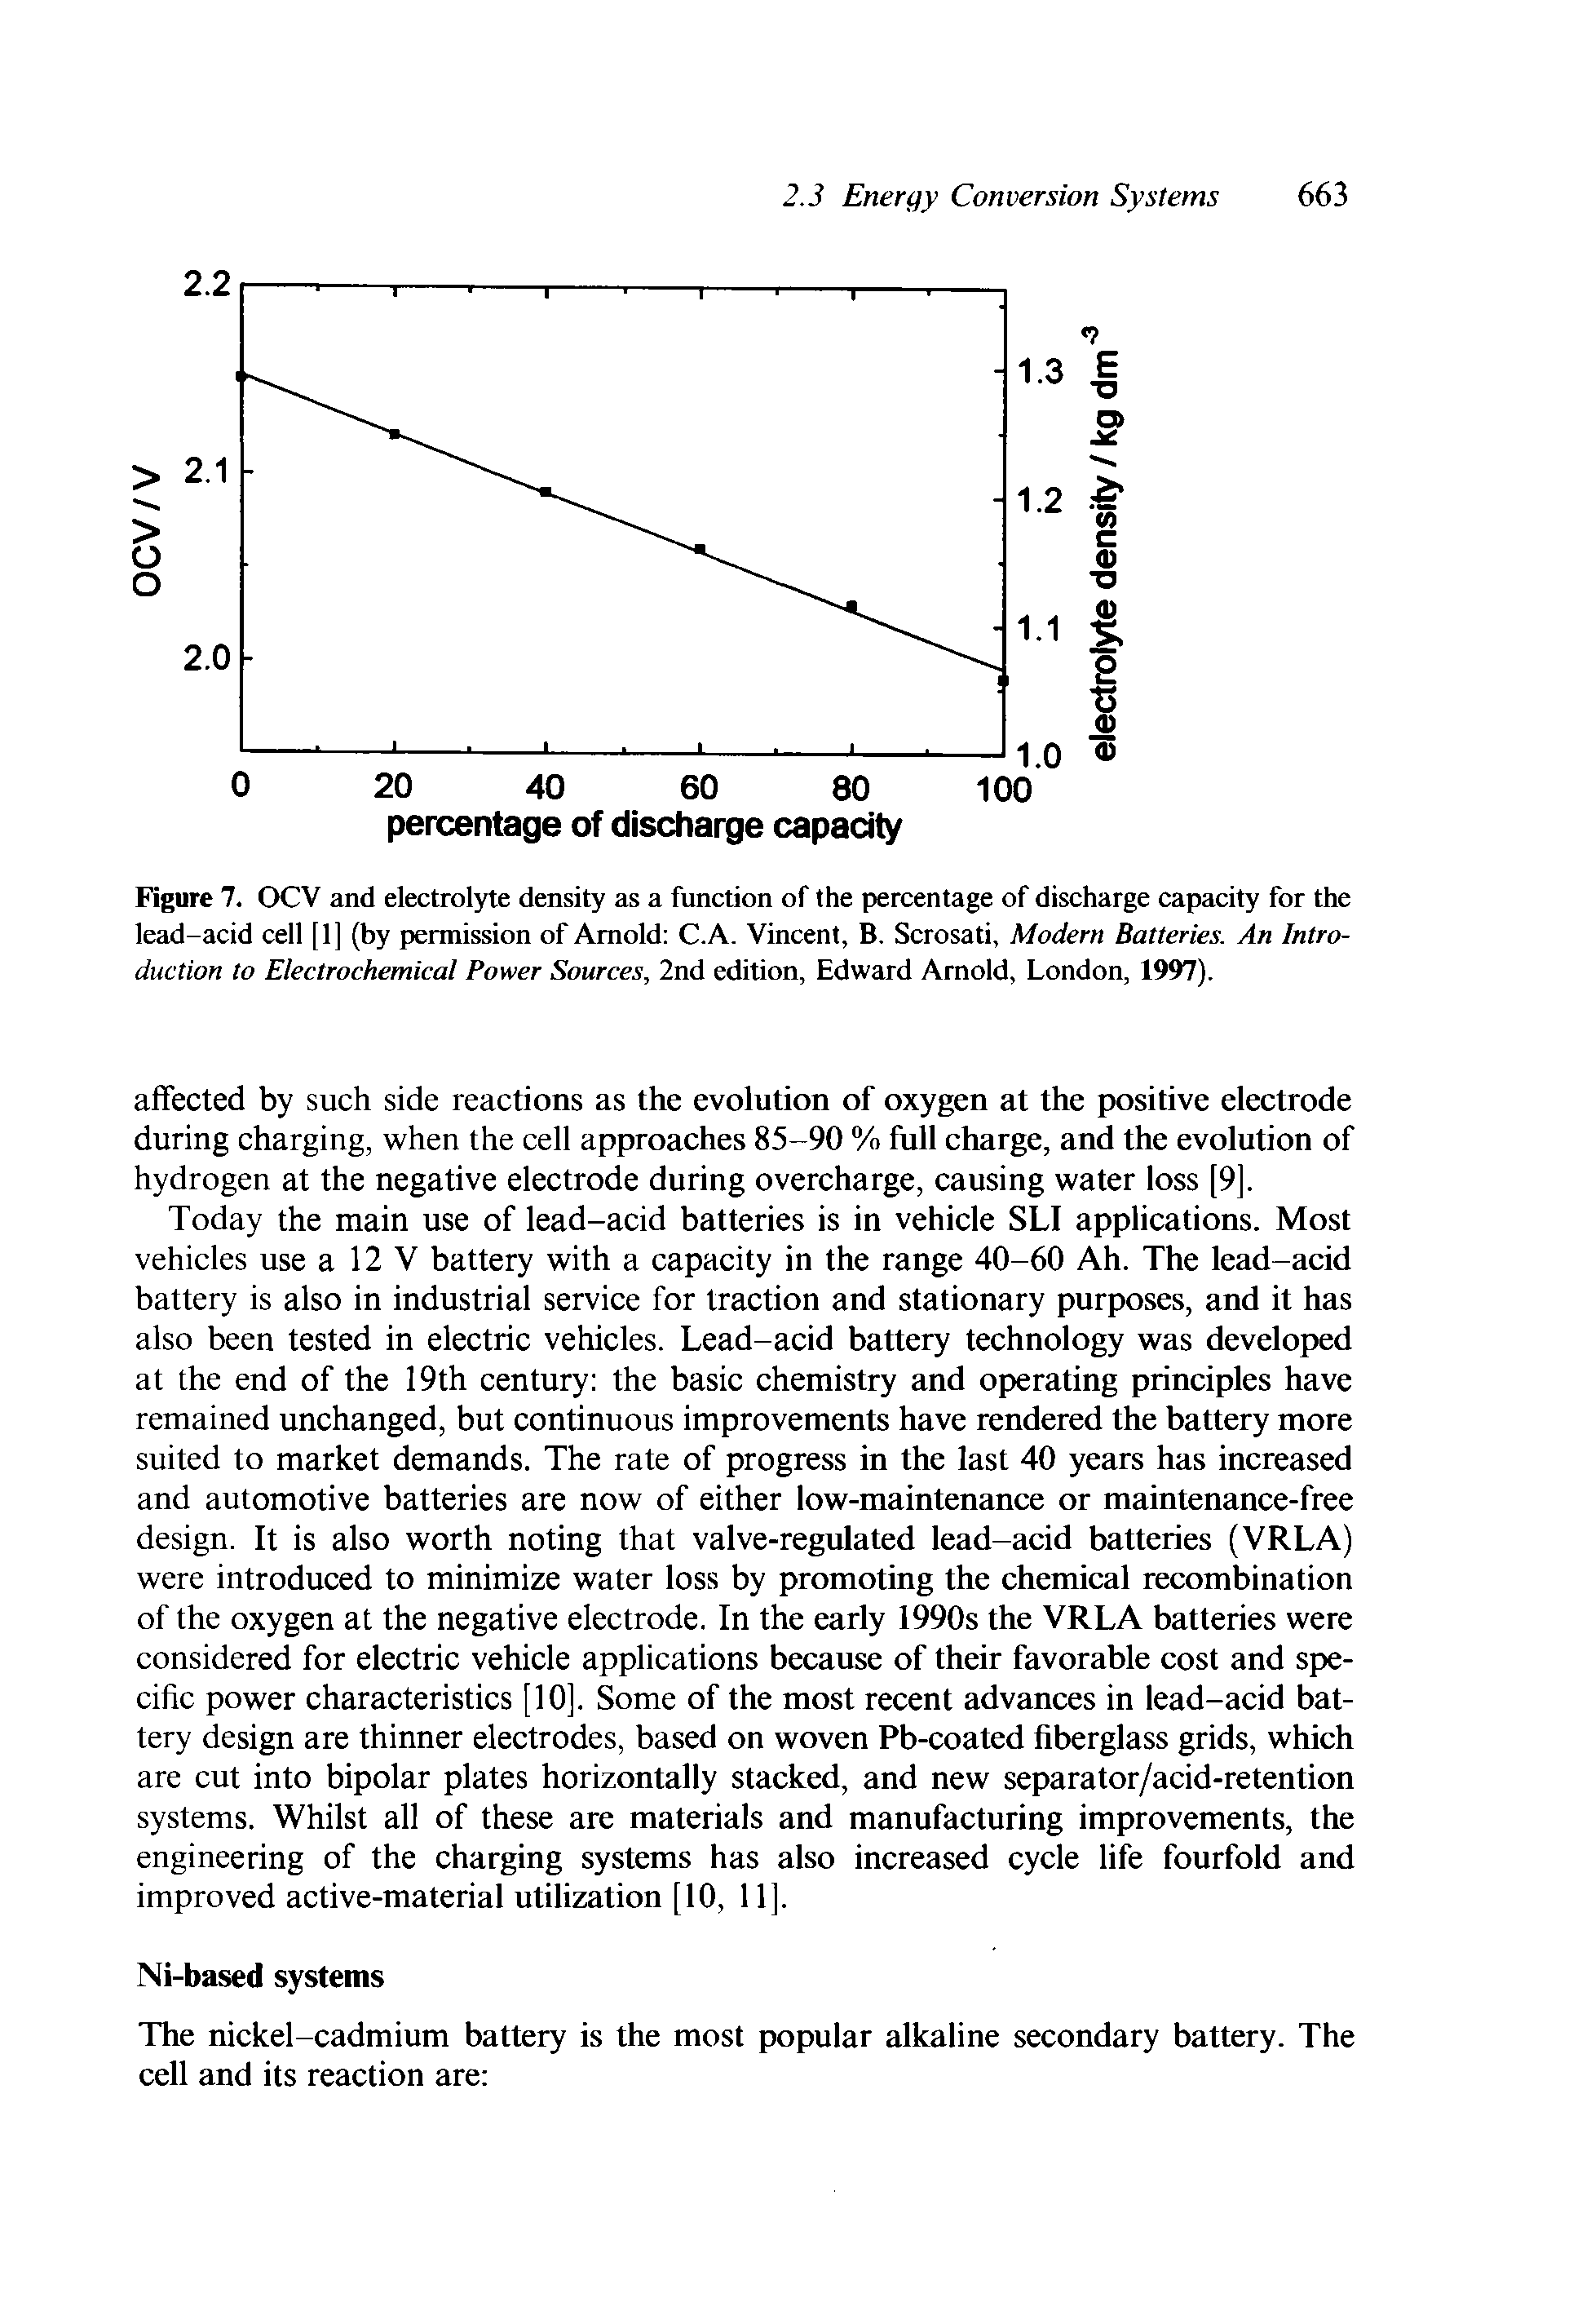 Figure 7. OCV and electrolyte density as a function of the percentage of discharge capacity for the lead-acid cell [1] (by permission of Arnold C.A. Vincent, B. Scrosati, Modern Batteries. An Introduction to Electrochemical Power Sources, 2nd edition, Edward Arnold, London, 1997).